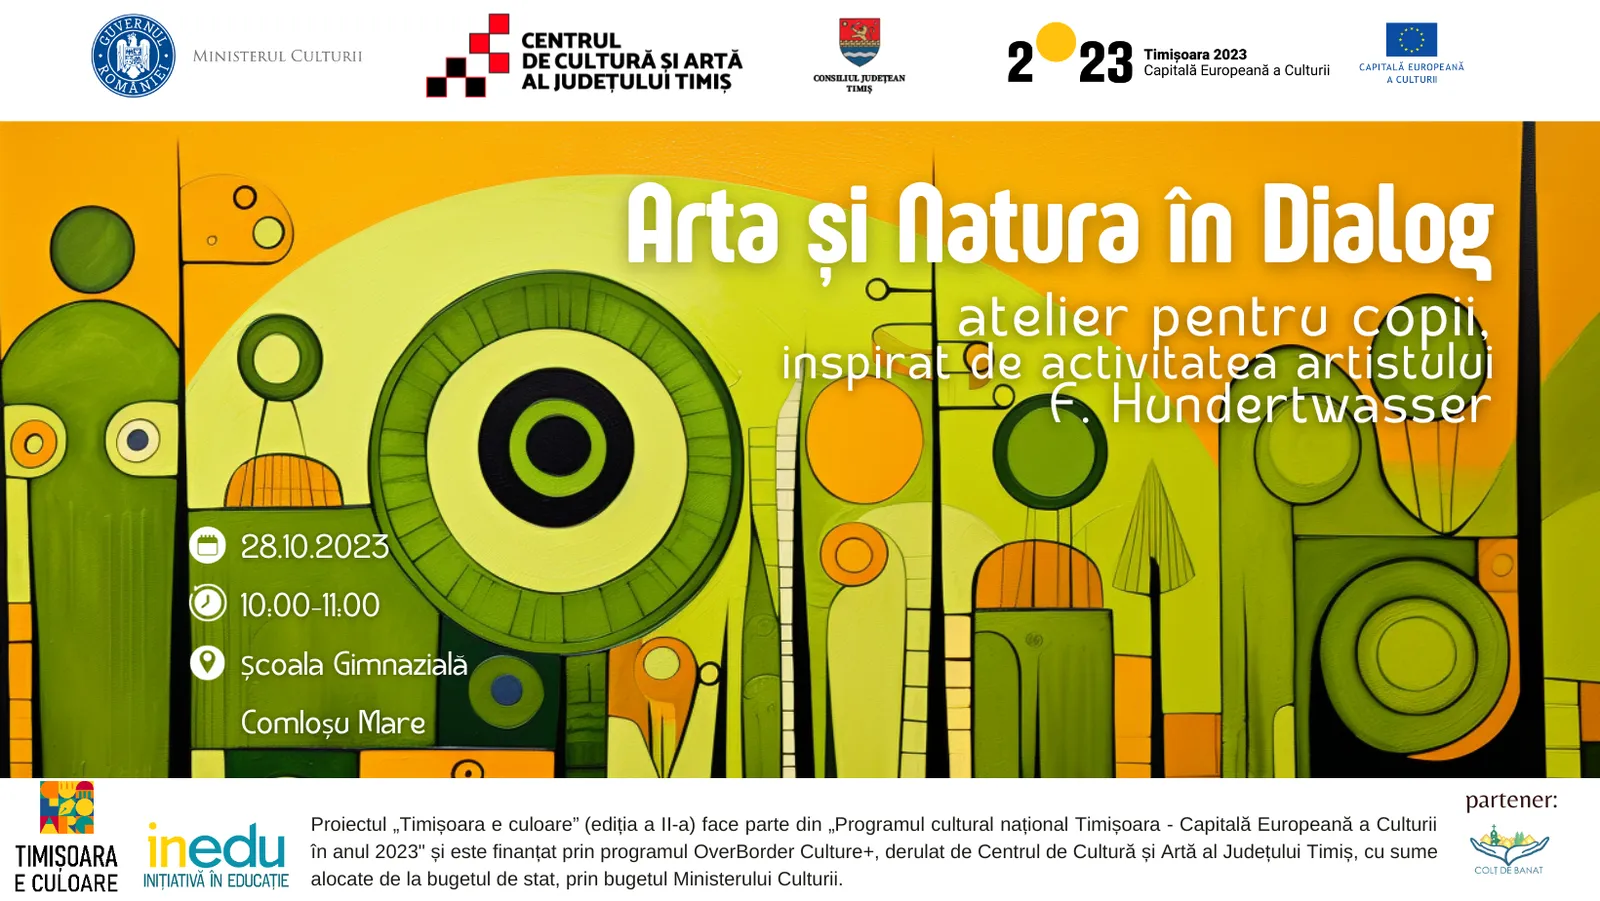 The Dialogue Between Art and Nature: Workshop for Children